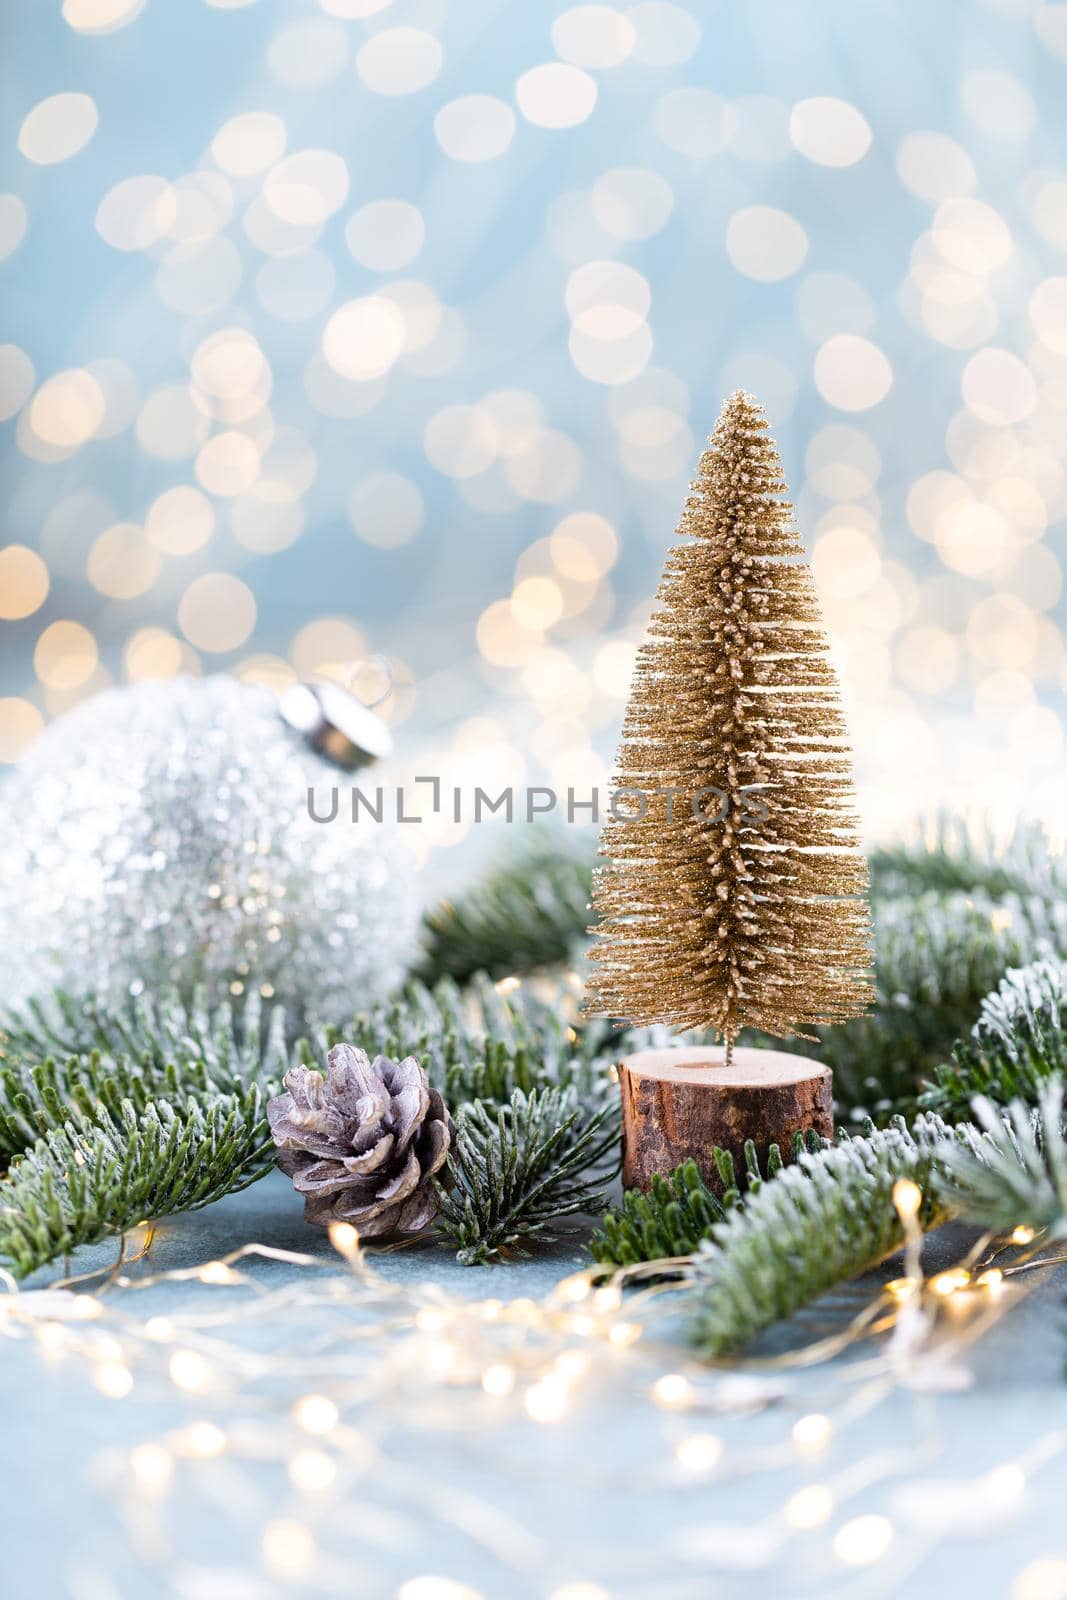 Christmas spruce with tree and blurred shiny lights. by gitusik